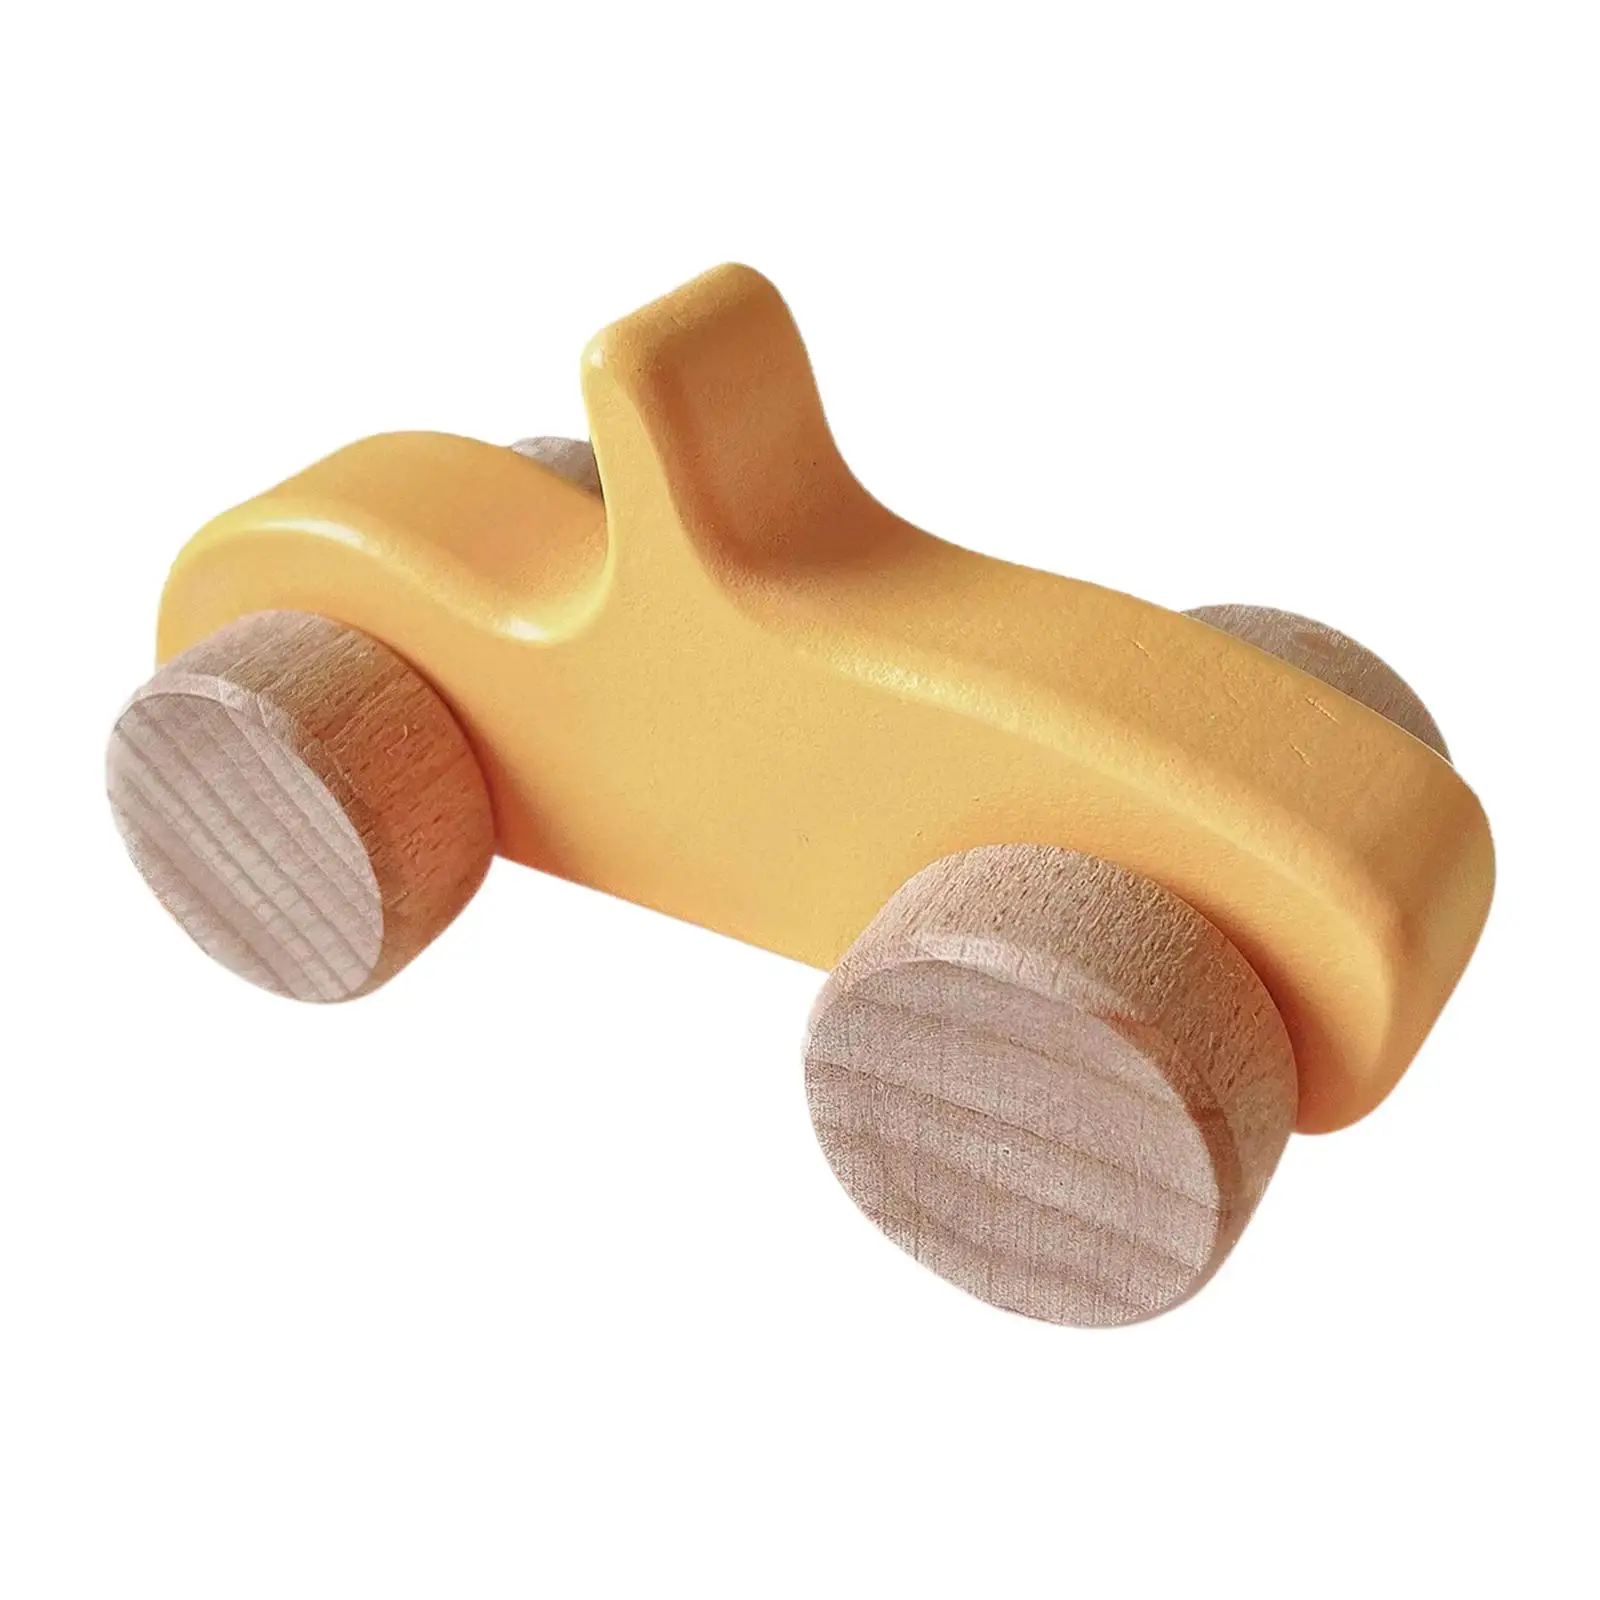 Wood Push Truck Vehicle Grasping Toy Baby Vehicle Toys Hand Push Car Toys for Boys Girls 1 2 Year Old Infant Kids Great Gifts